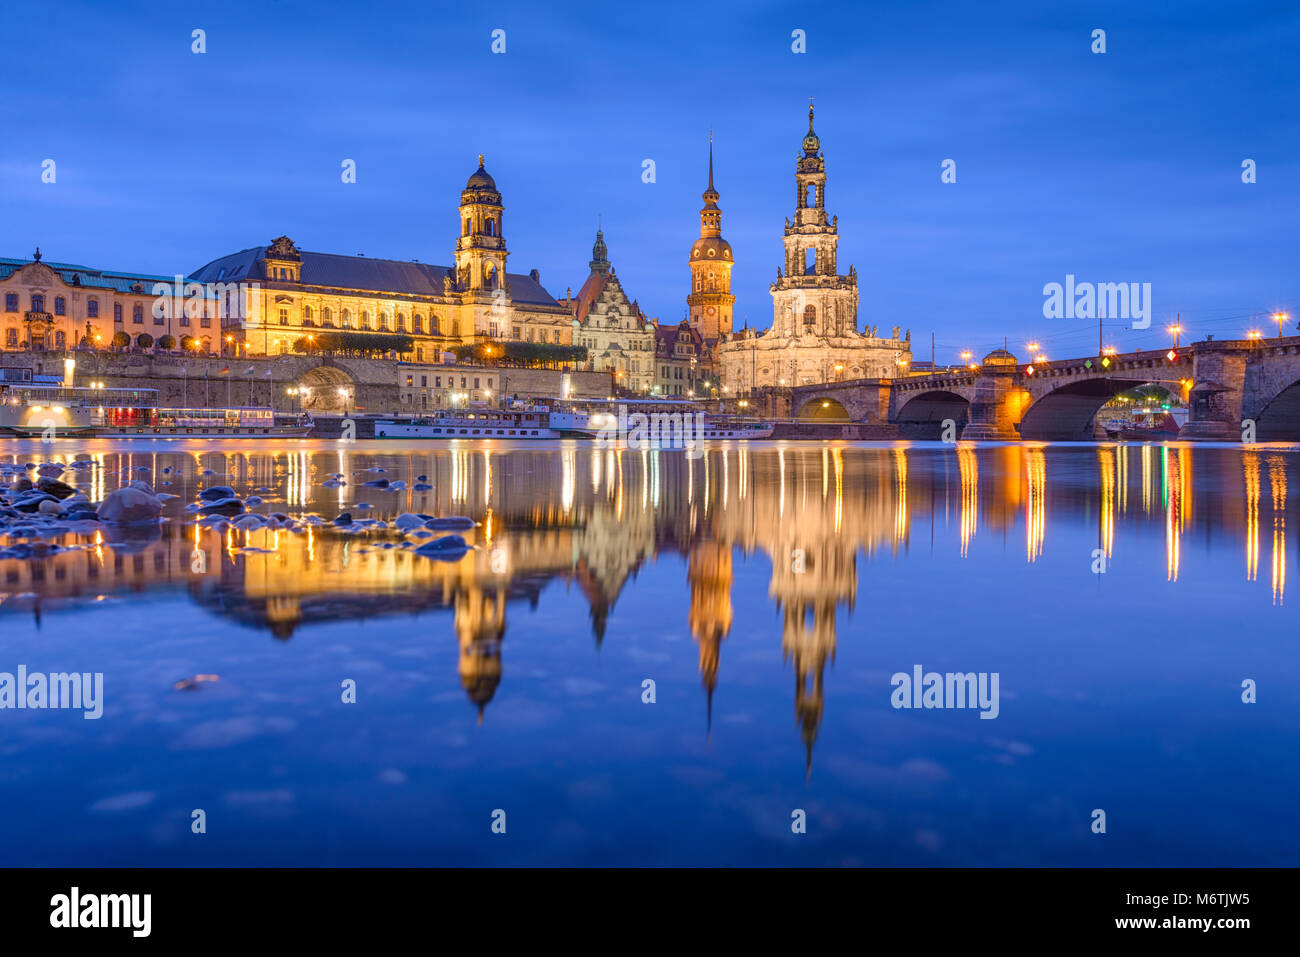 Dresden, Germany classical cathedrals and spires on The Elbe River at night. Stock Photo